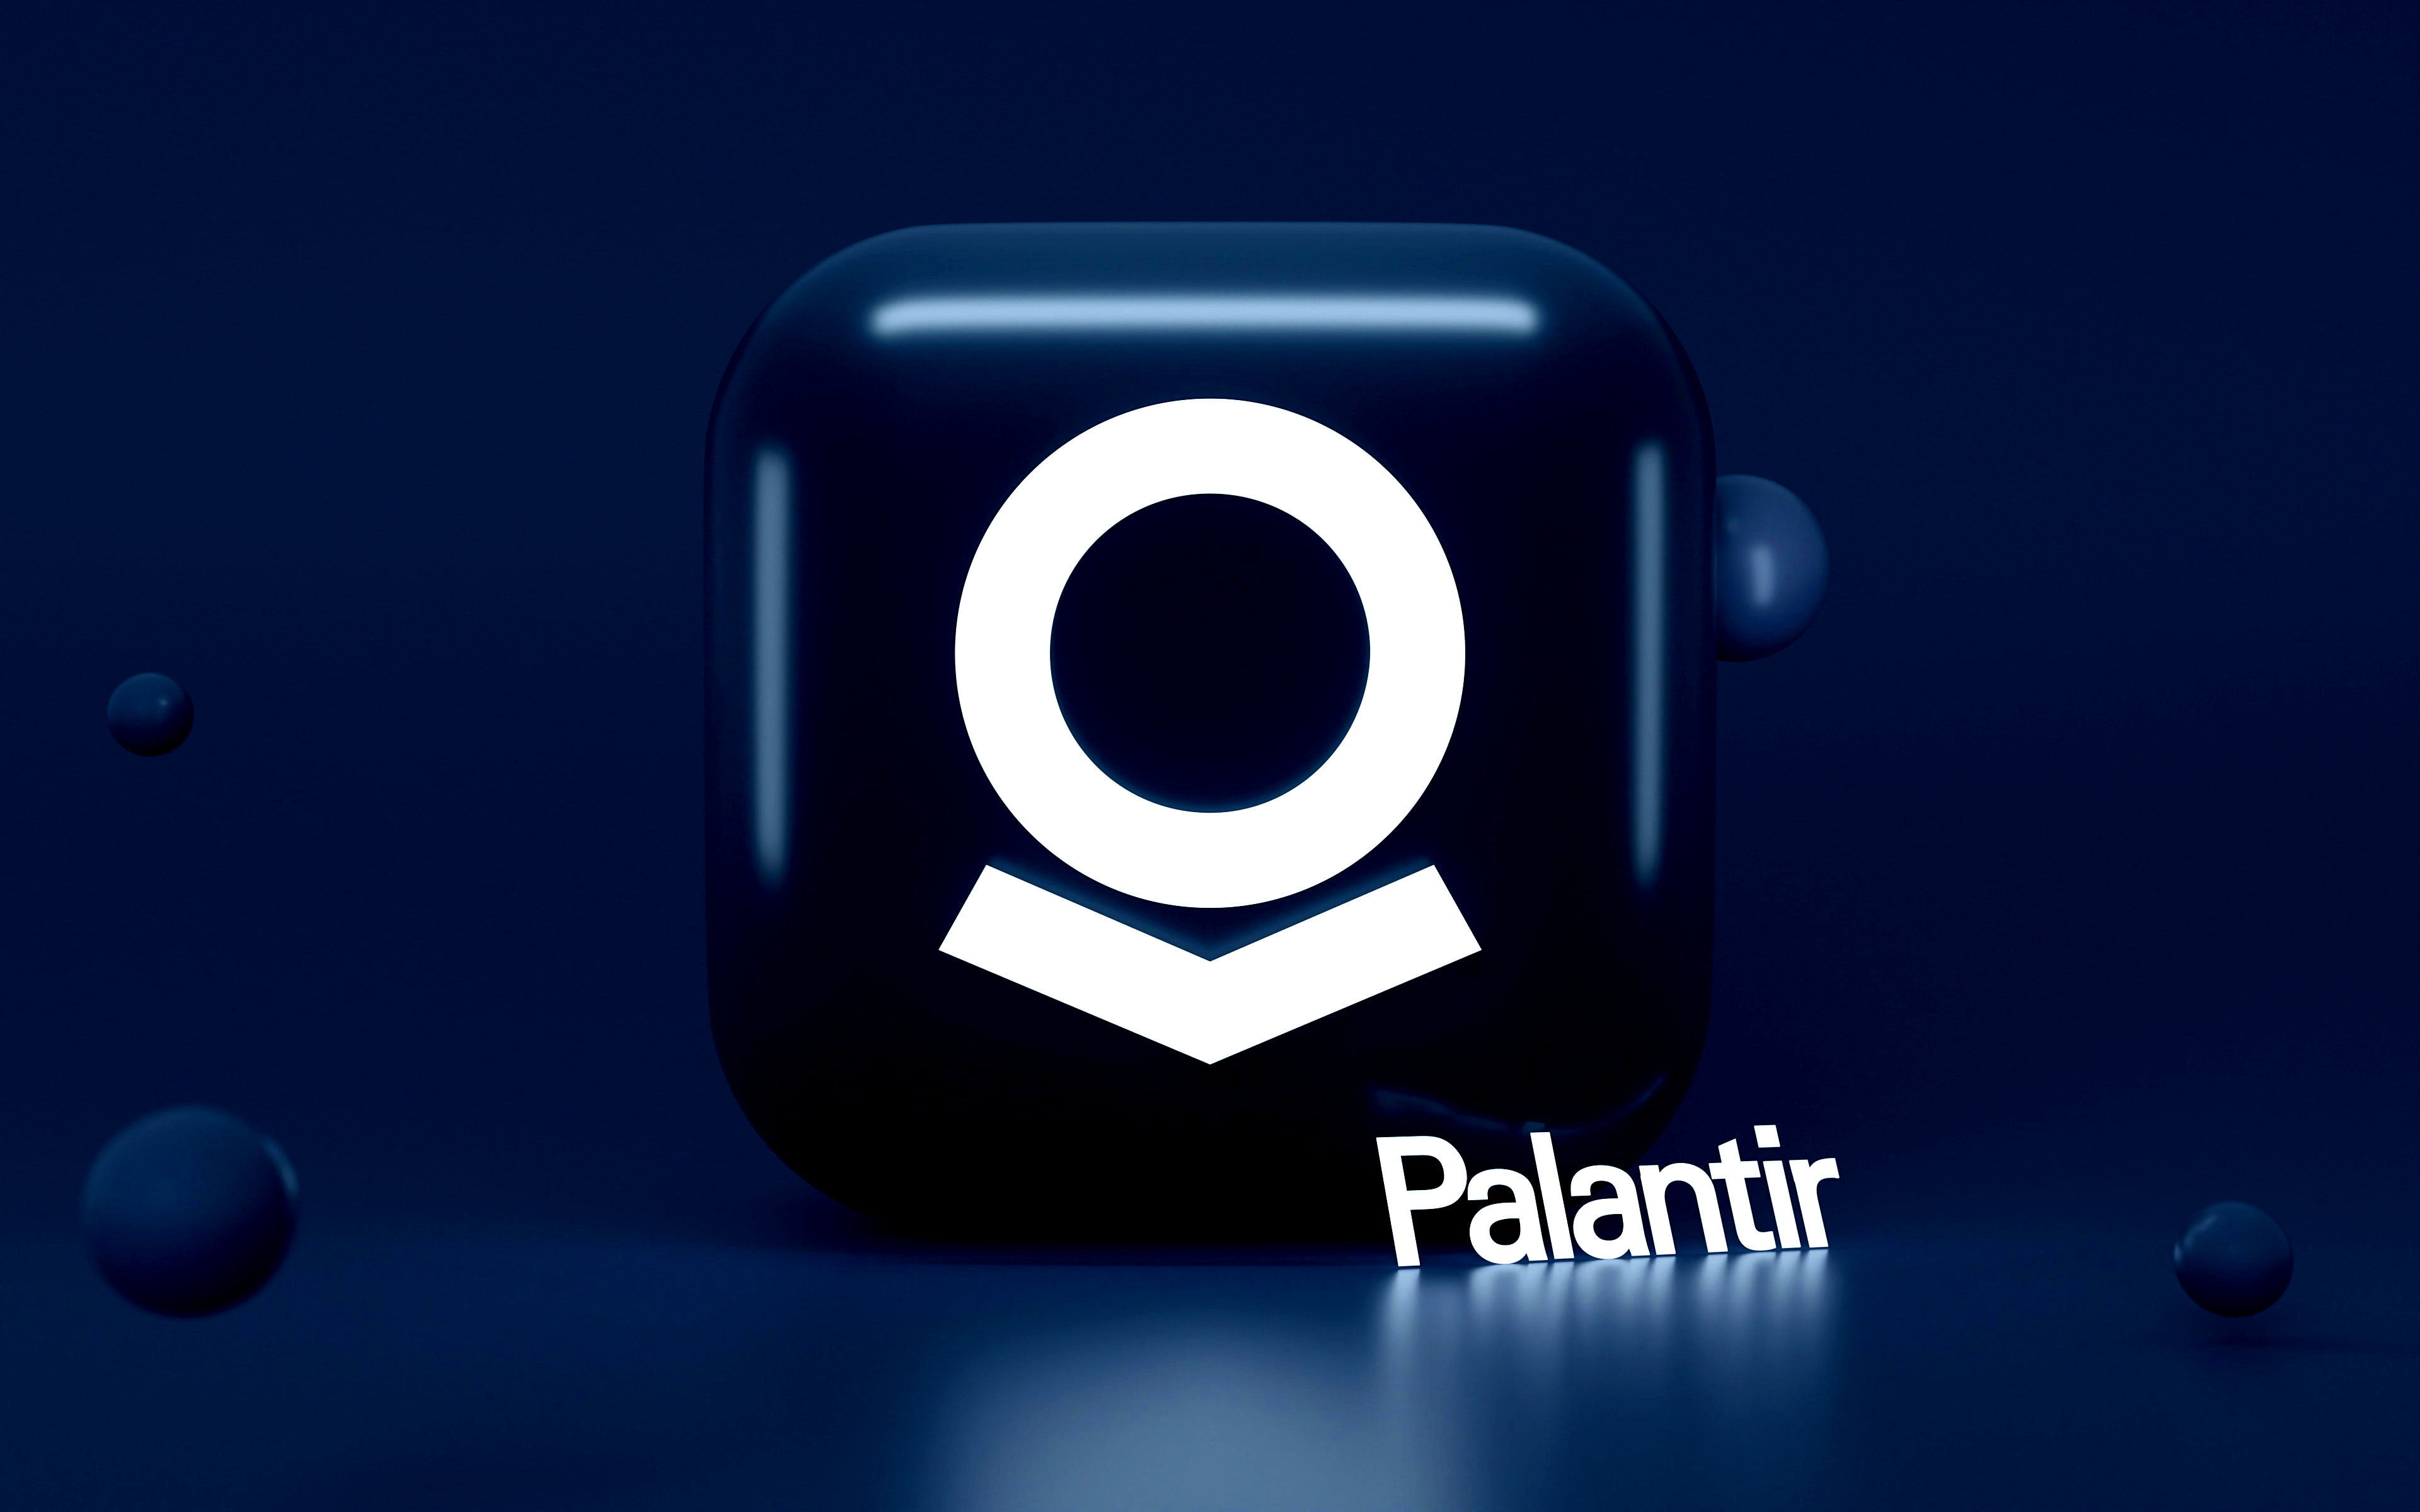 Palantir stock soars 20% after surprise Q4 earnings beat